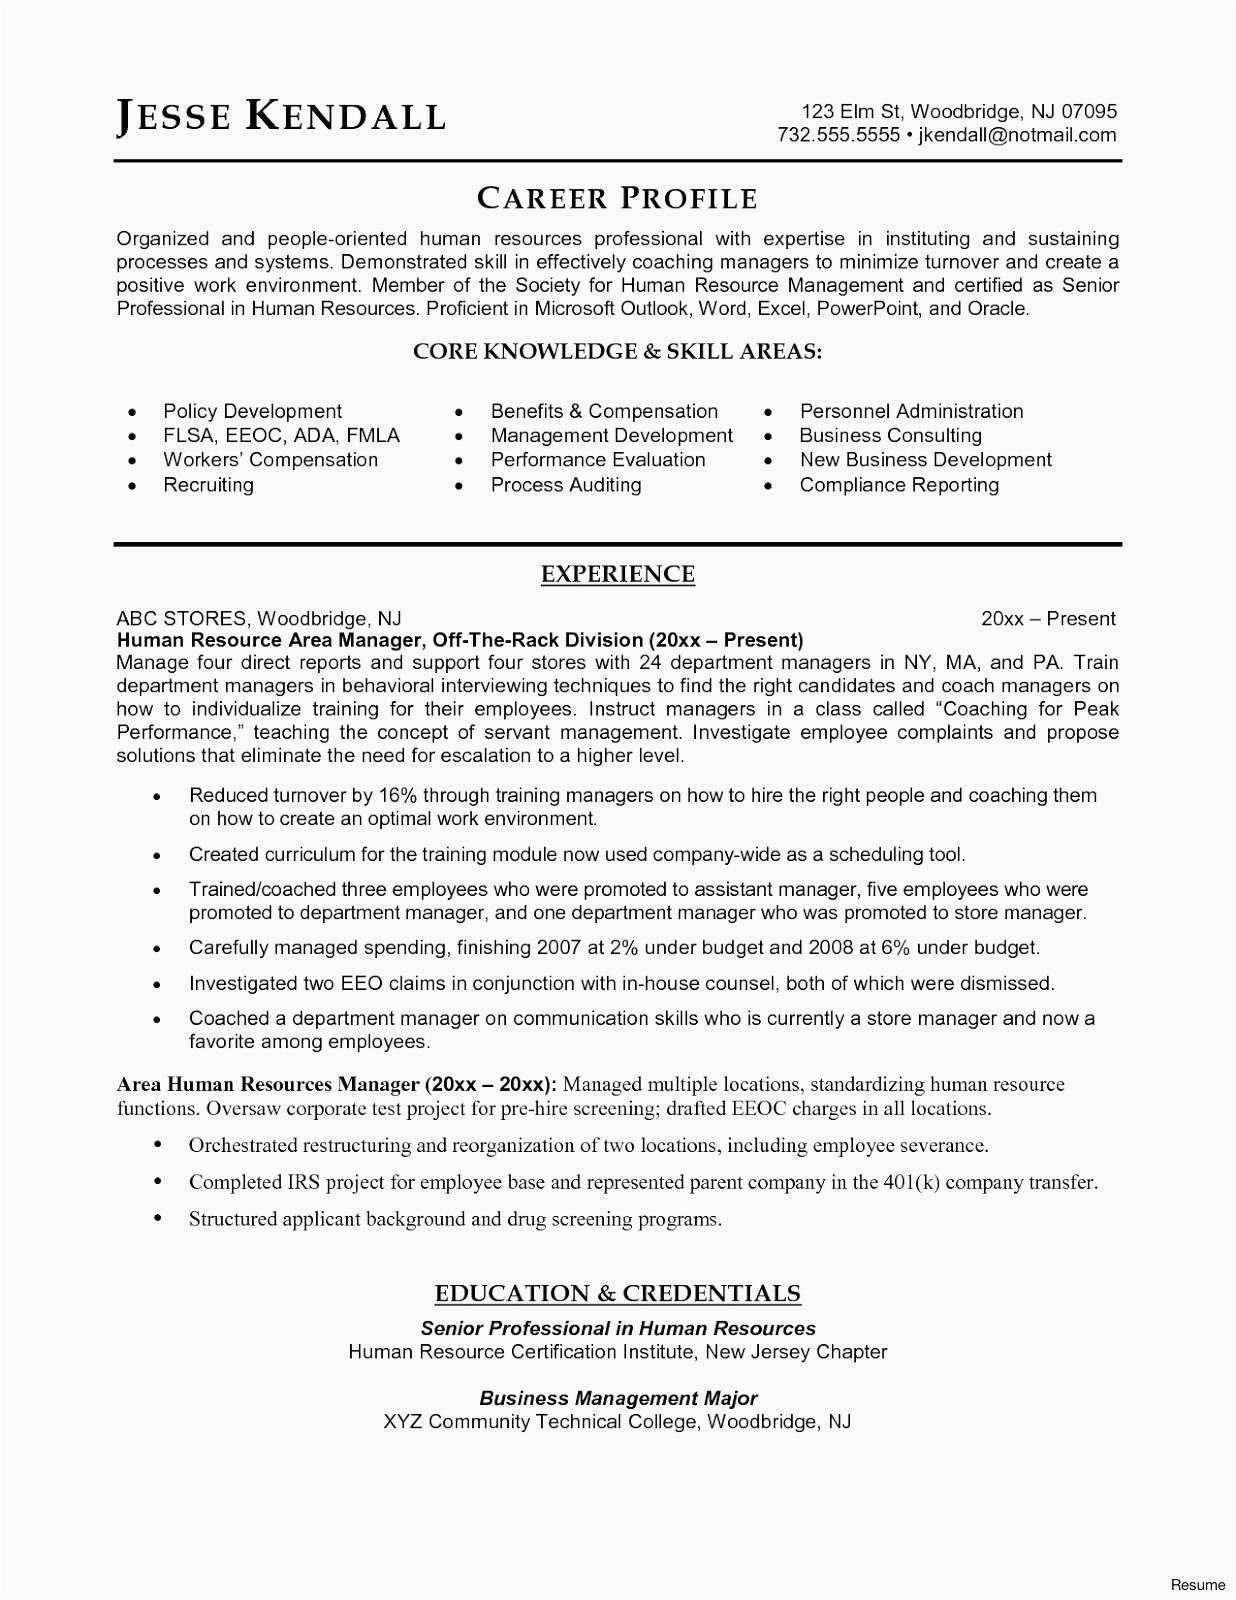 Free Sample Of Human Services Resume Free Resume Templates Human Services Resume Examples